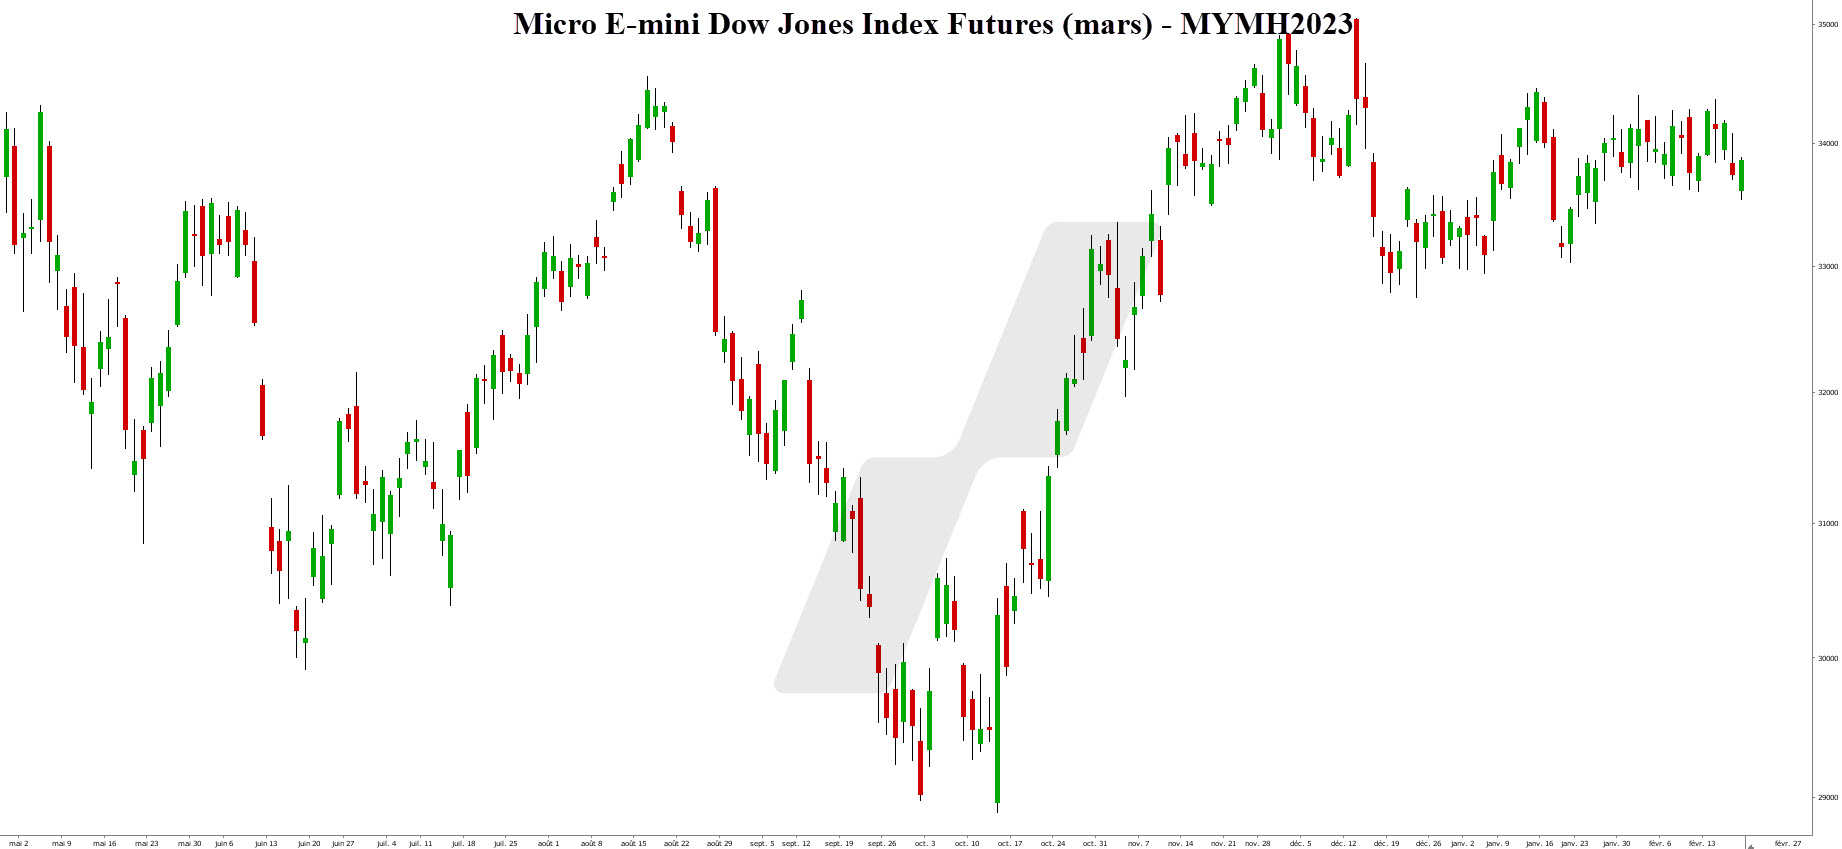 dow futures - djia futures - graph MYM